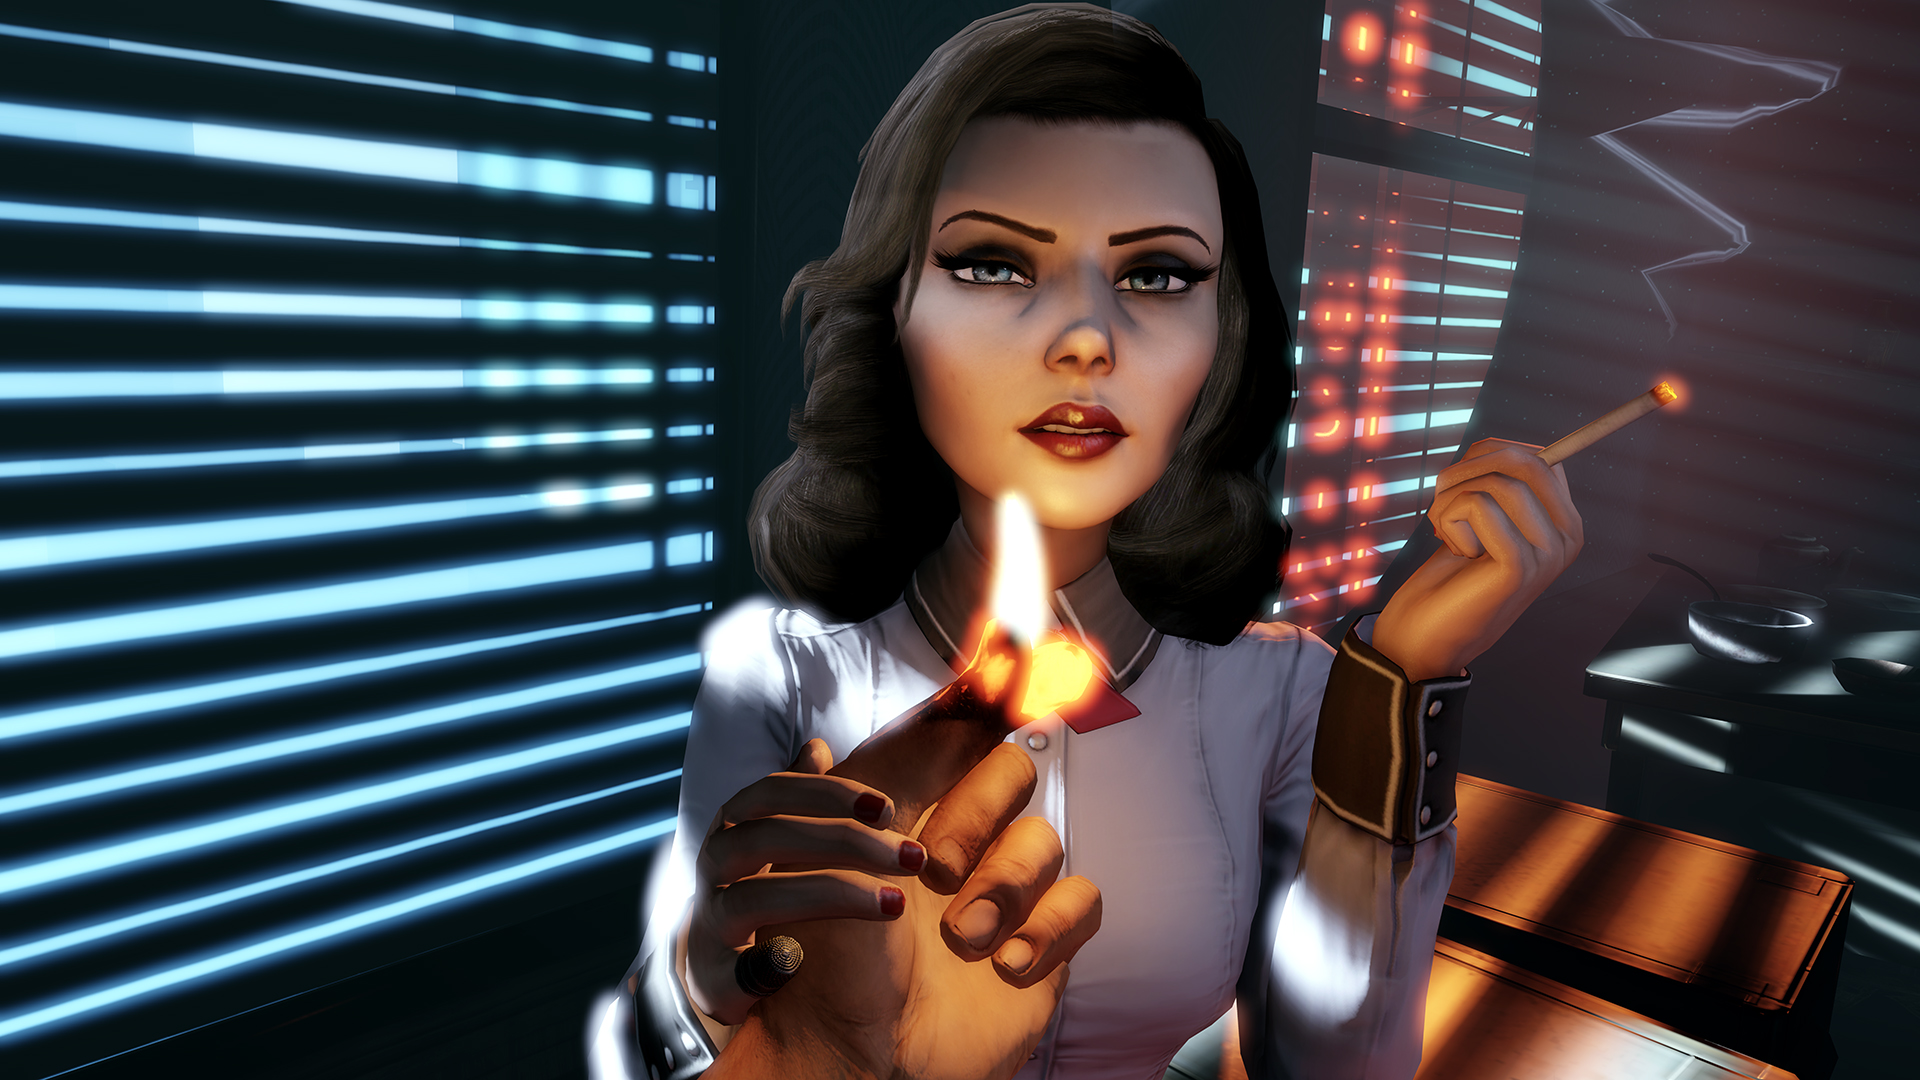 Amazing BioShock Infinite: Burial At Sea Pictures & Backgrounds